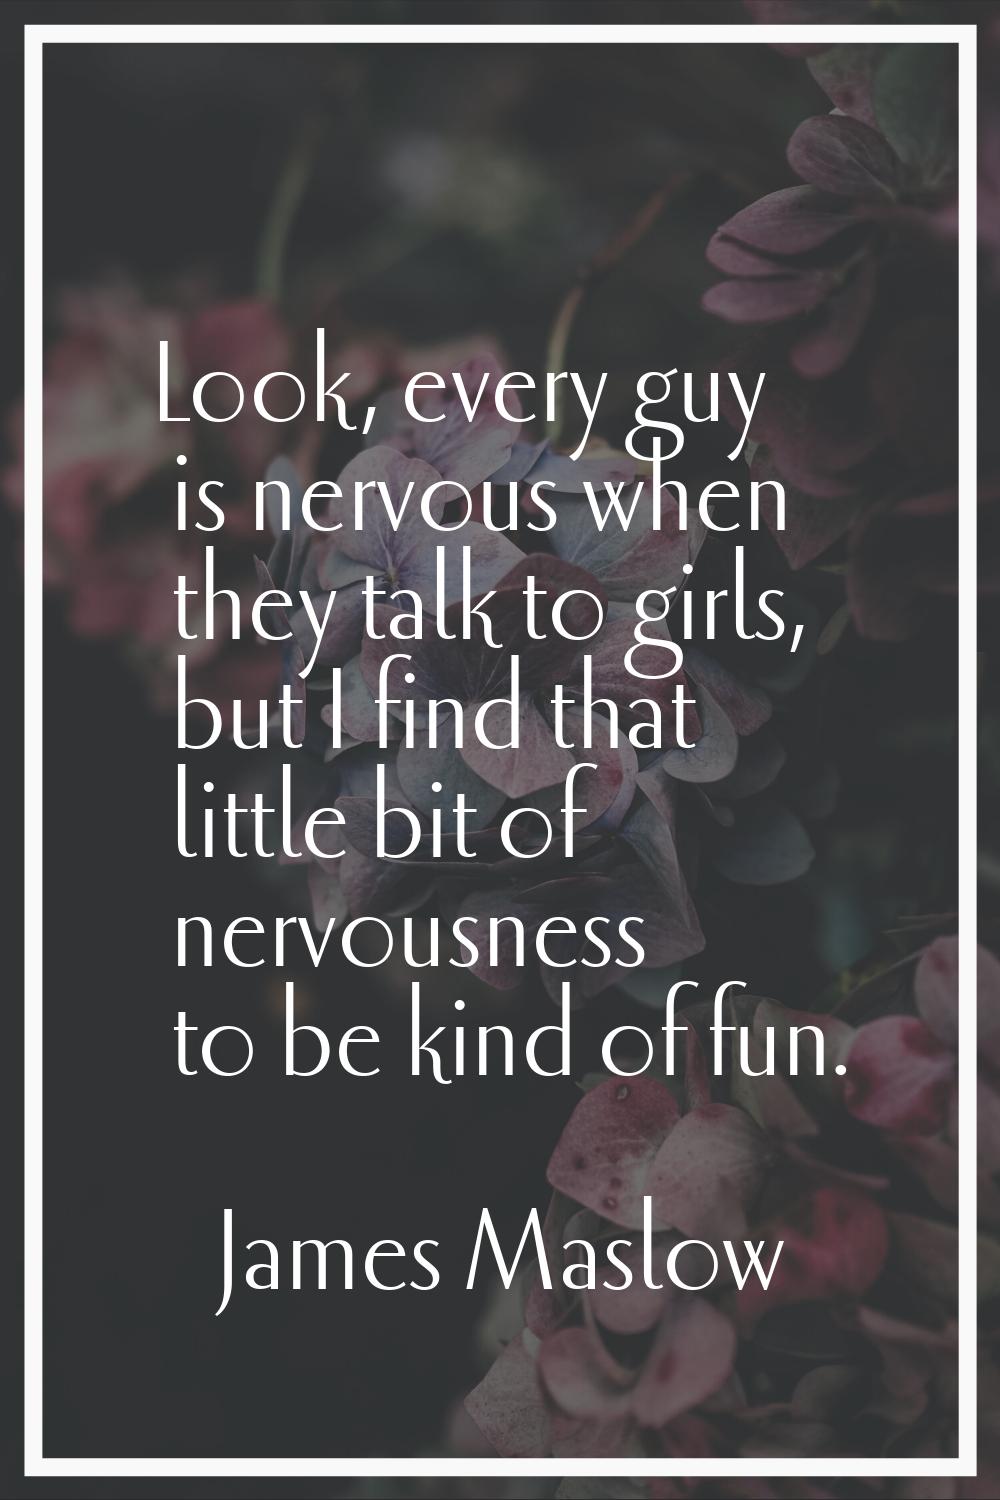 Look, every guy is nervous when they talk to girls, but I find that little bit of nervousness to be